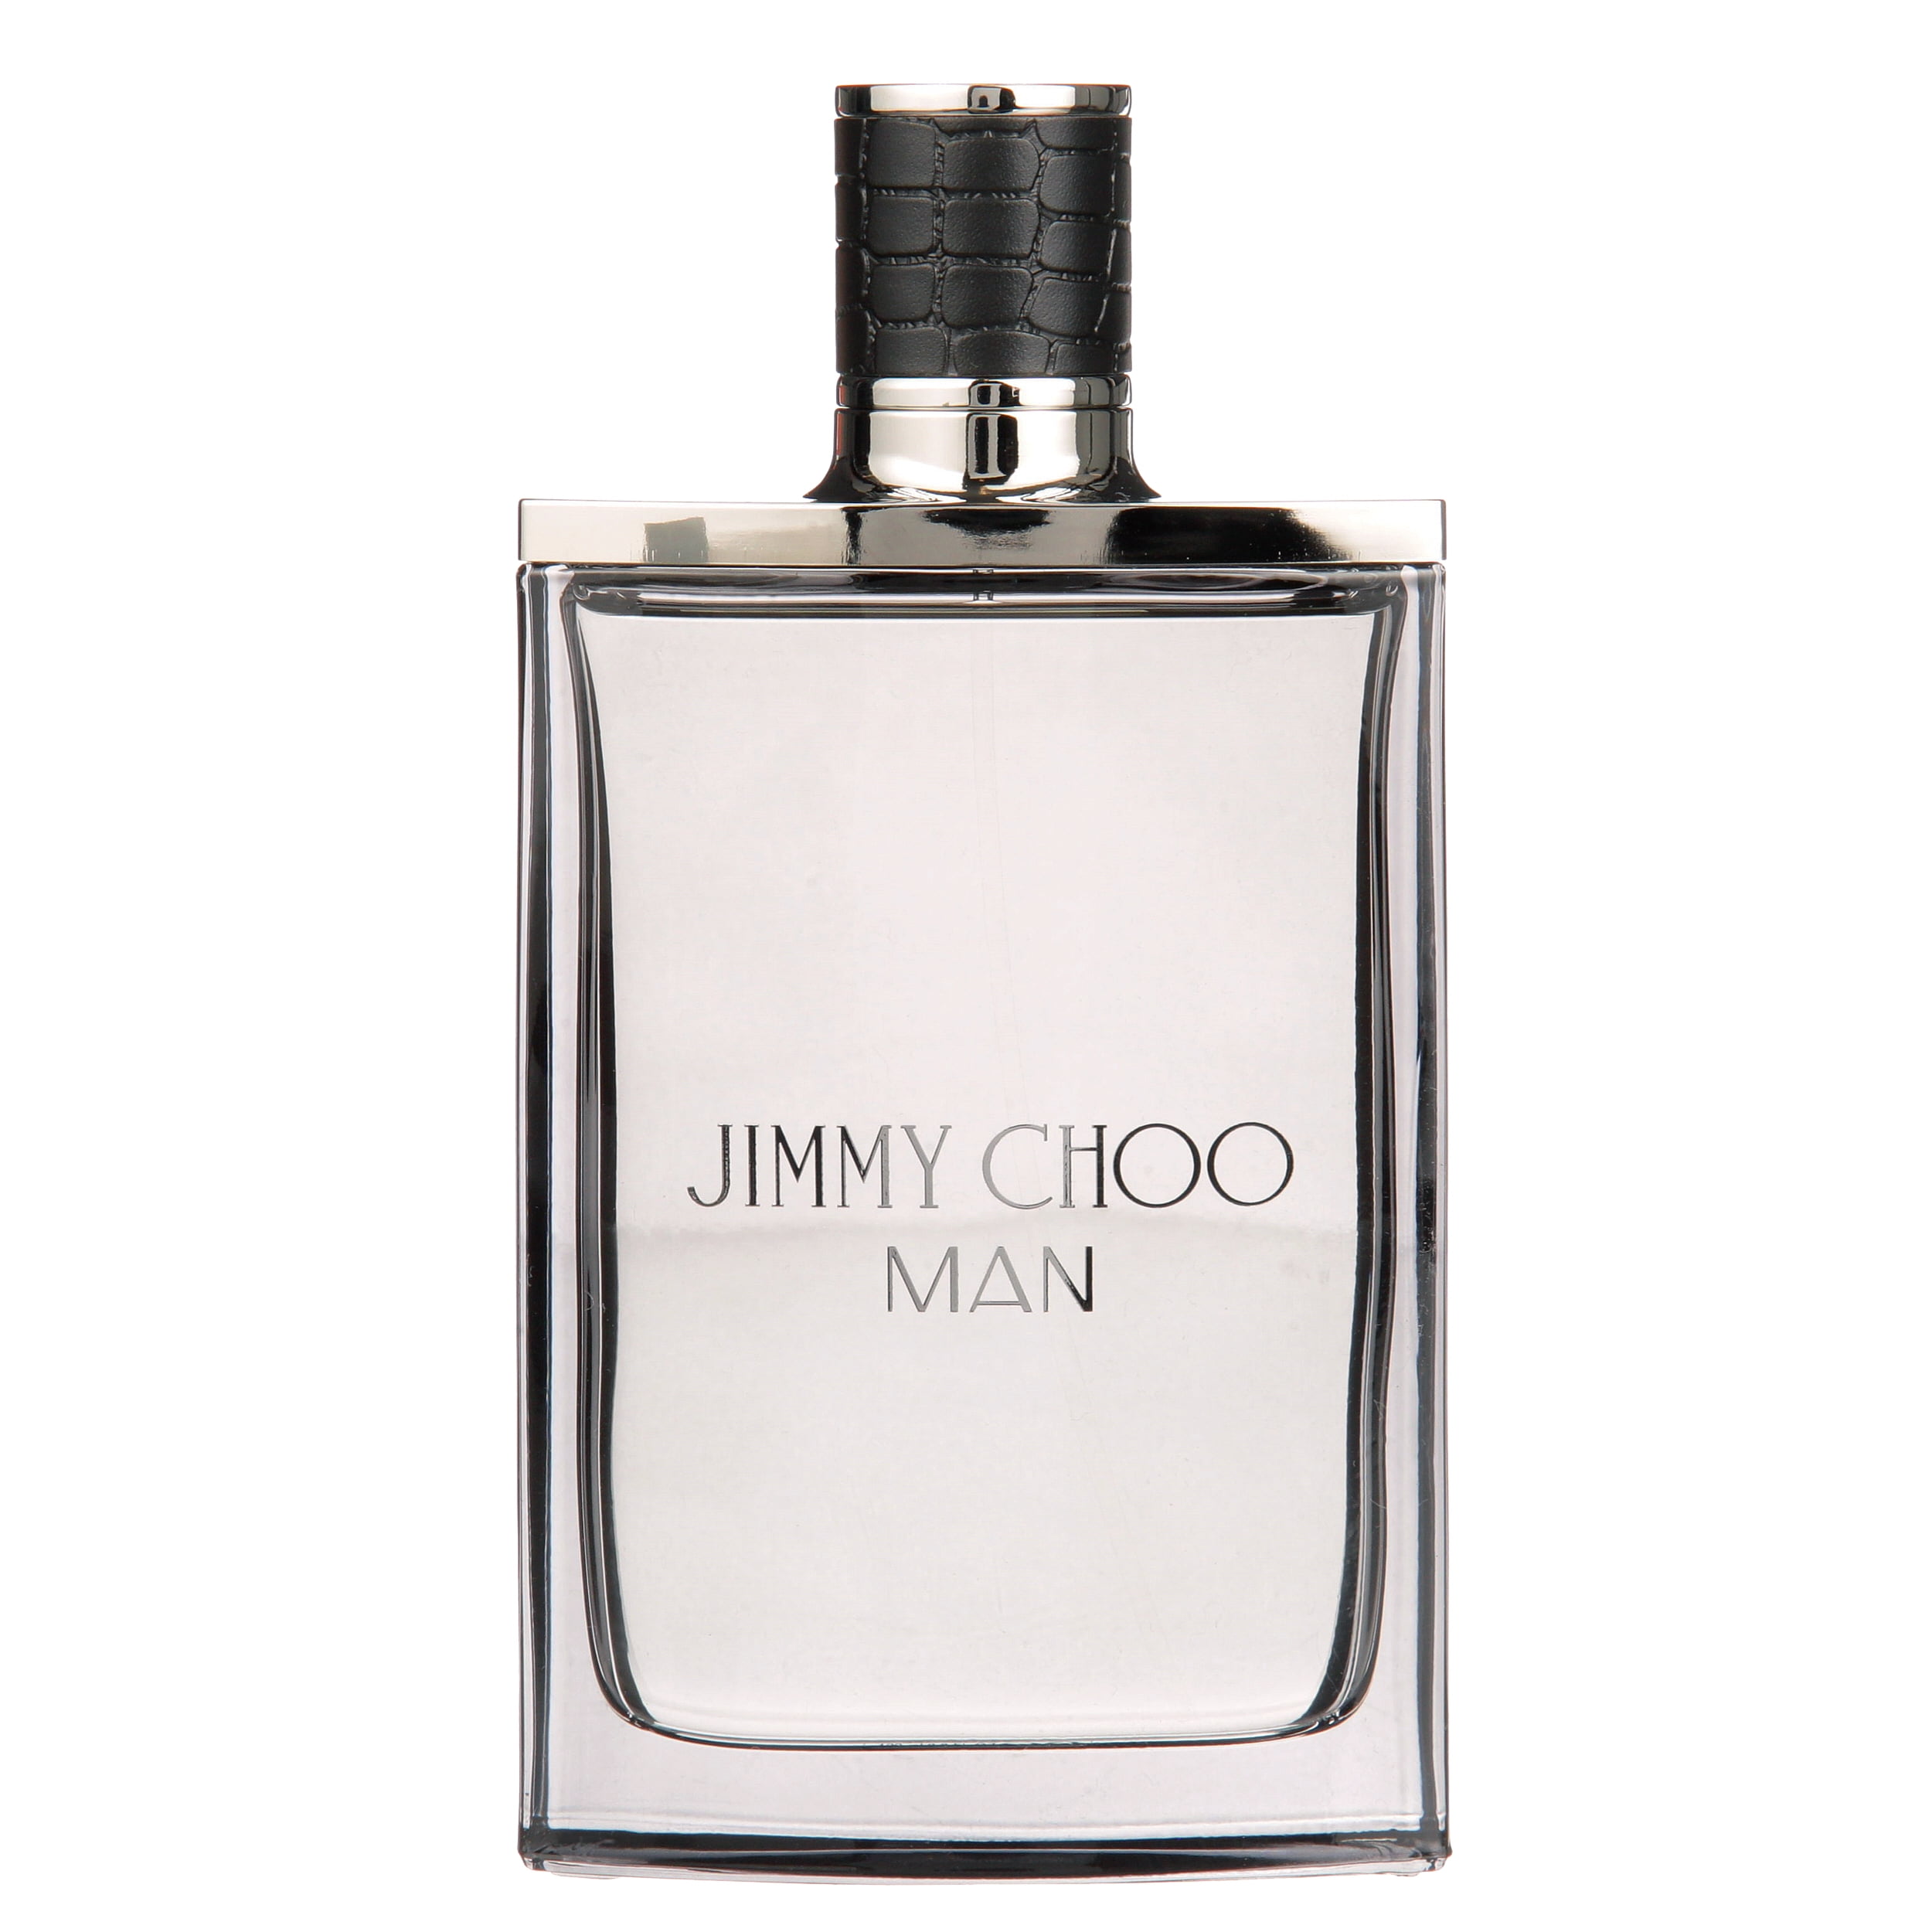 JIMMY CHOO MAN BLUE by jimmy Choo cologne for men EDT 3.4 / 3.3 oz NEW IN  BOX